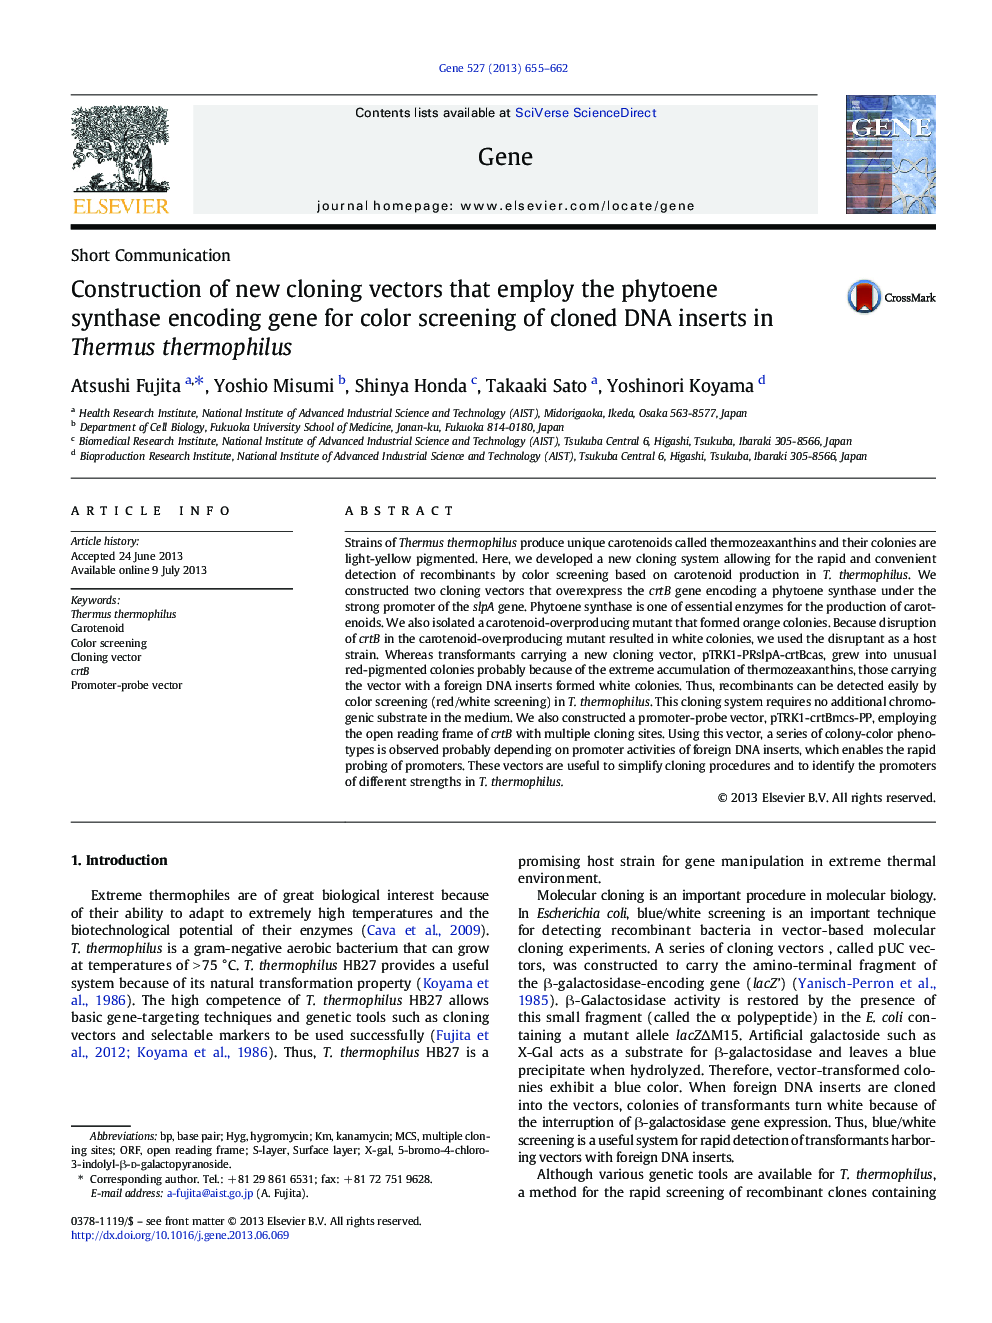 Construction of new cloning vectors that employ the phytoene synthase encoding gene for color screening of cloned DNA inserts in Thermus thermophilus